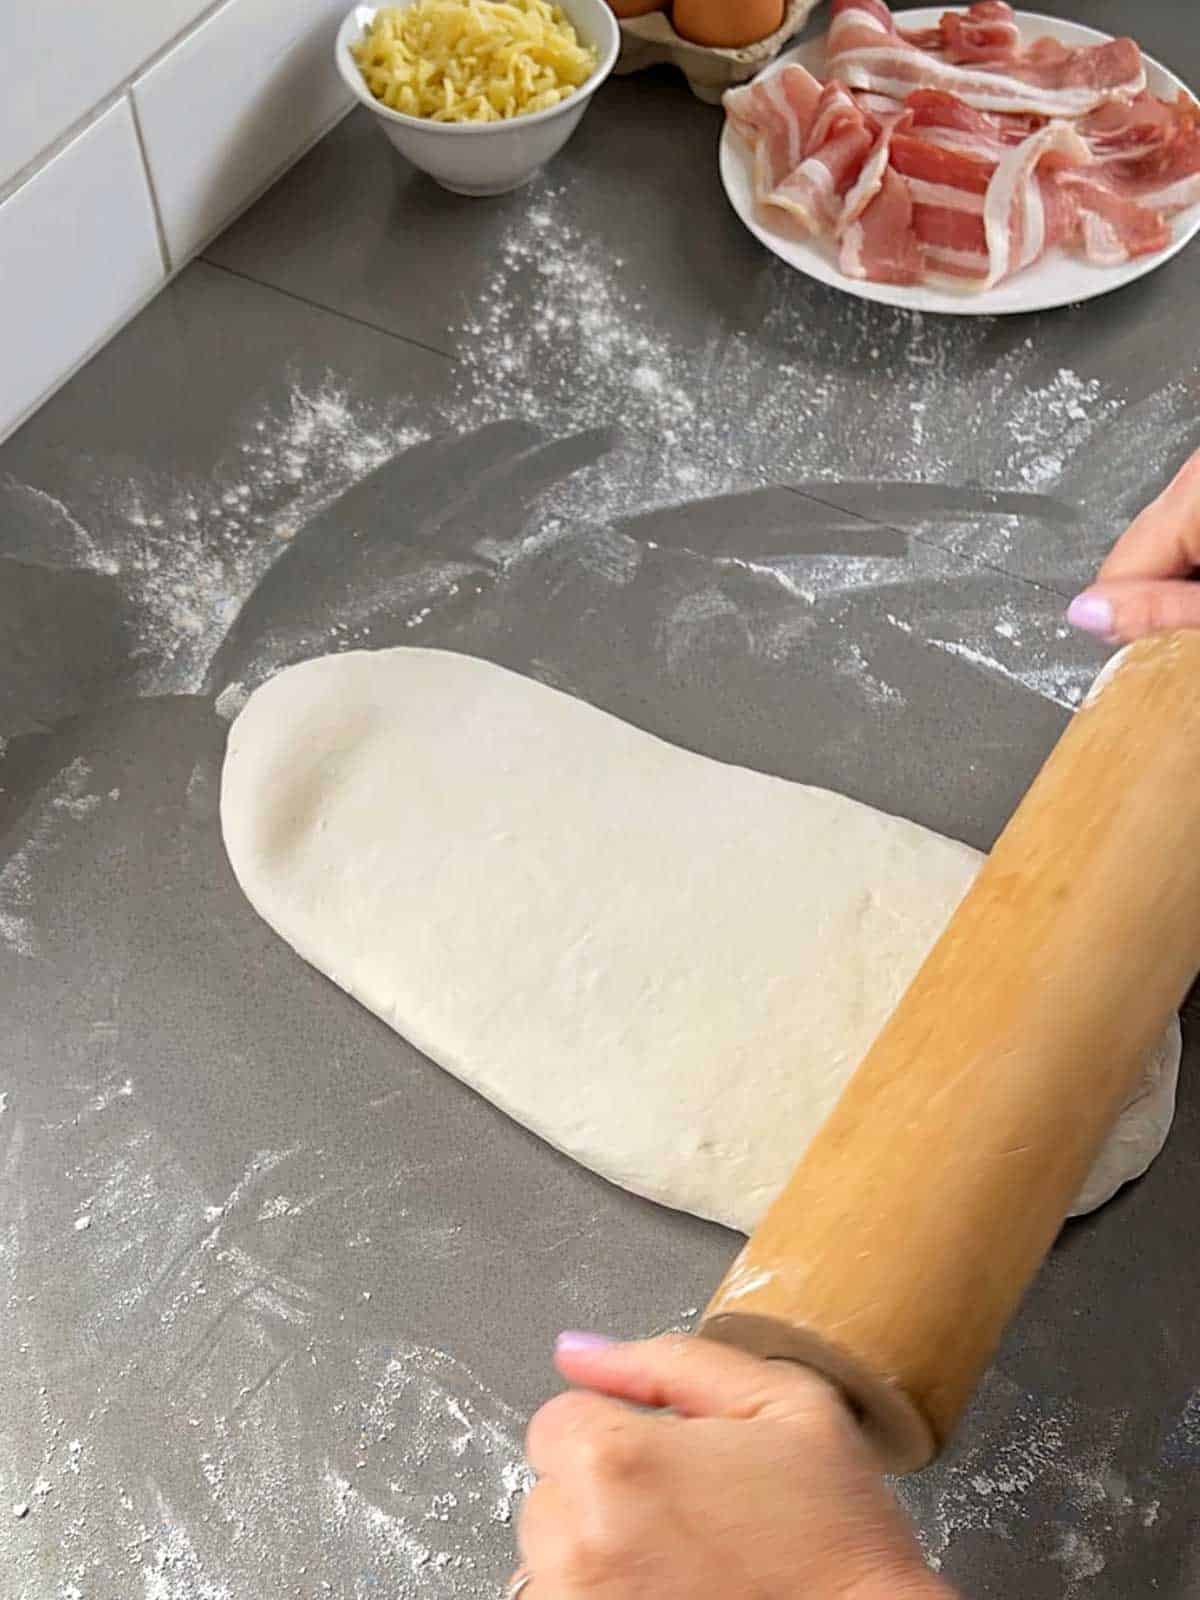 Pizza dough being rolled out on a floured, grey bench.